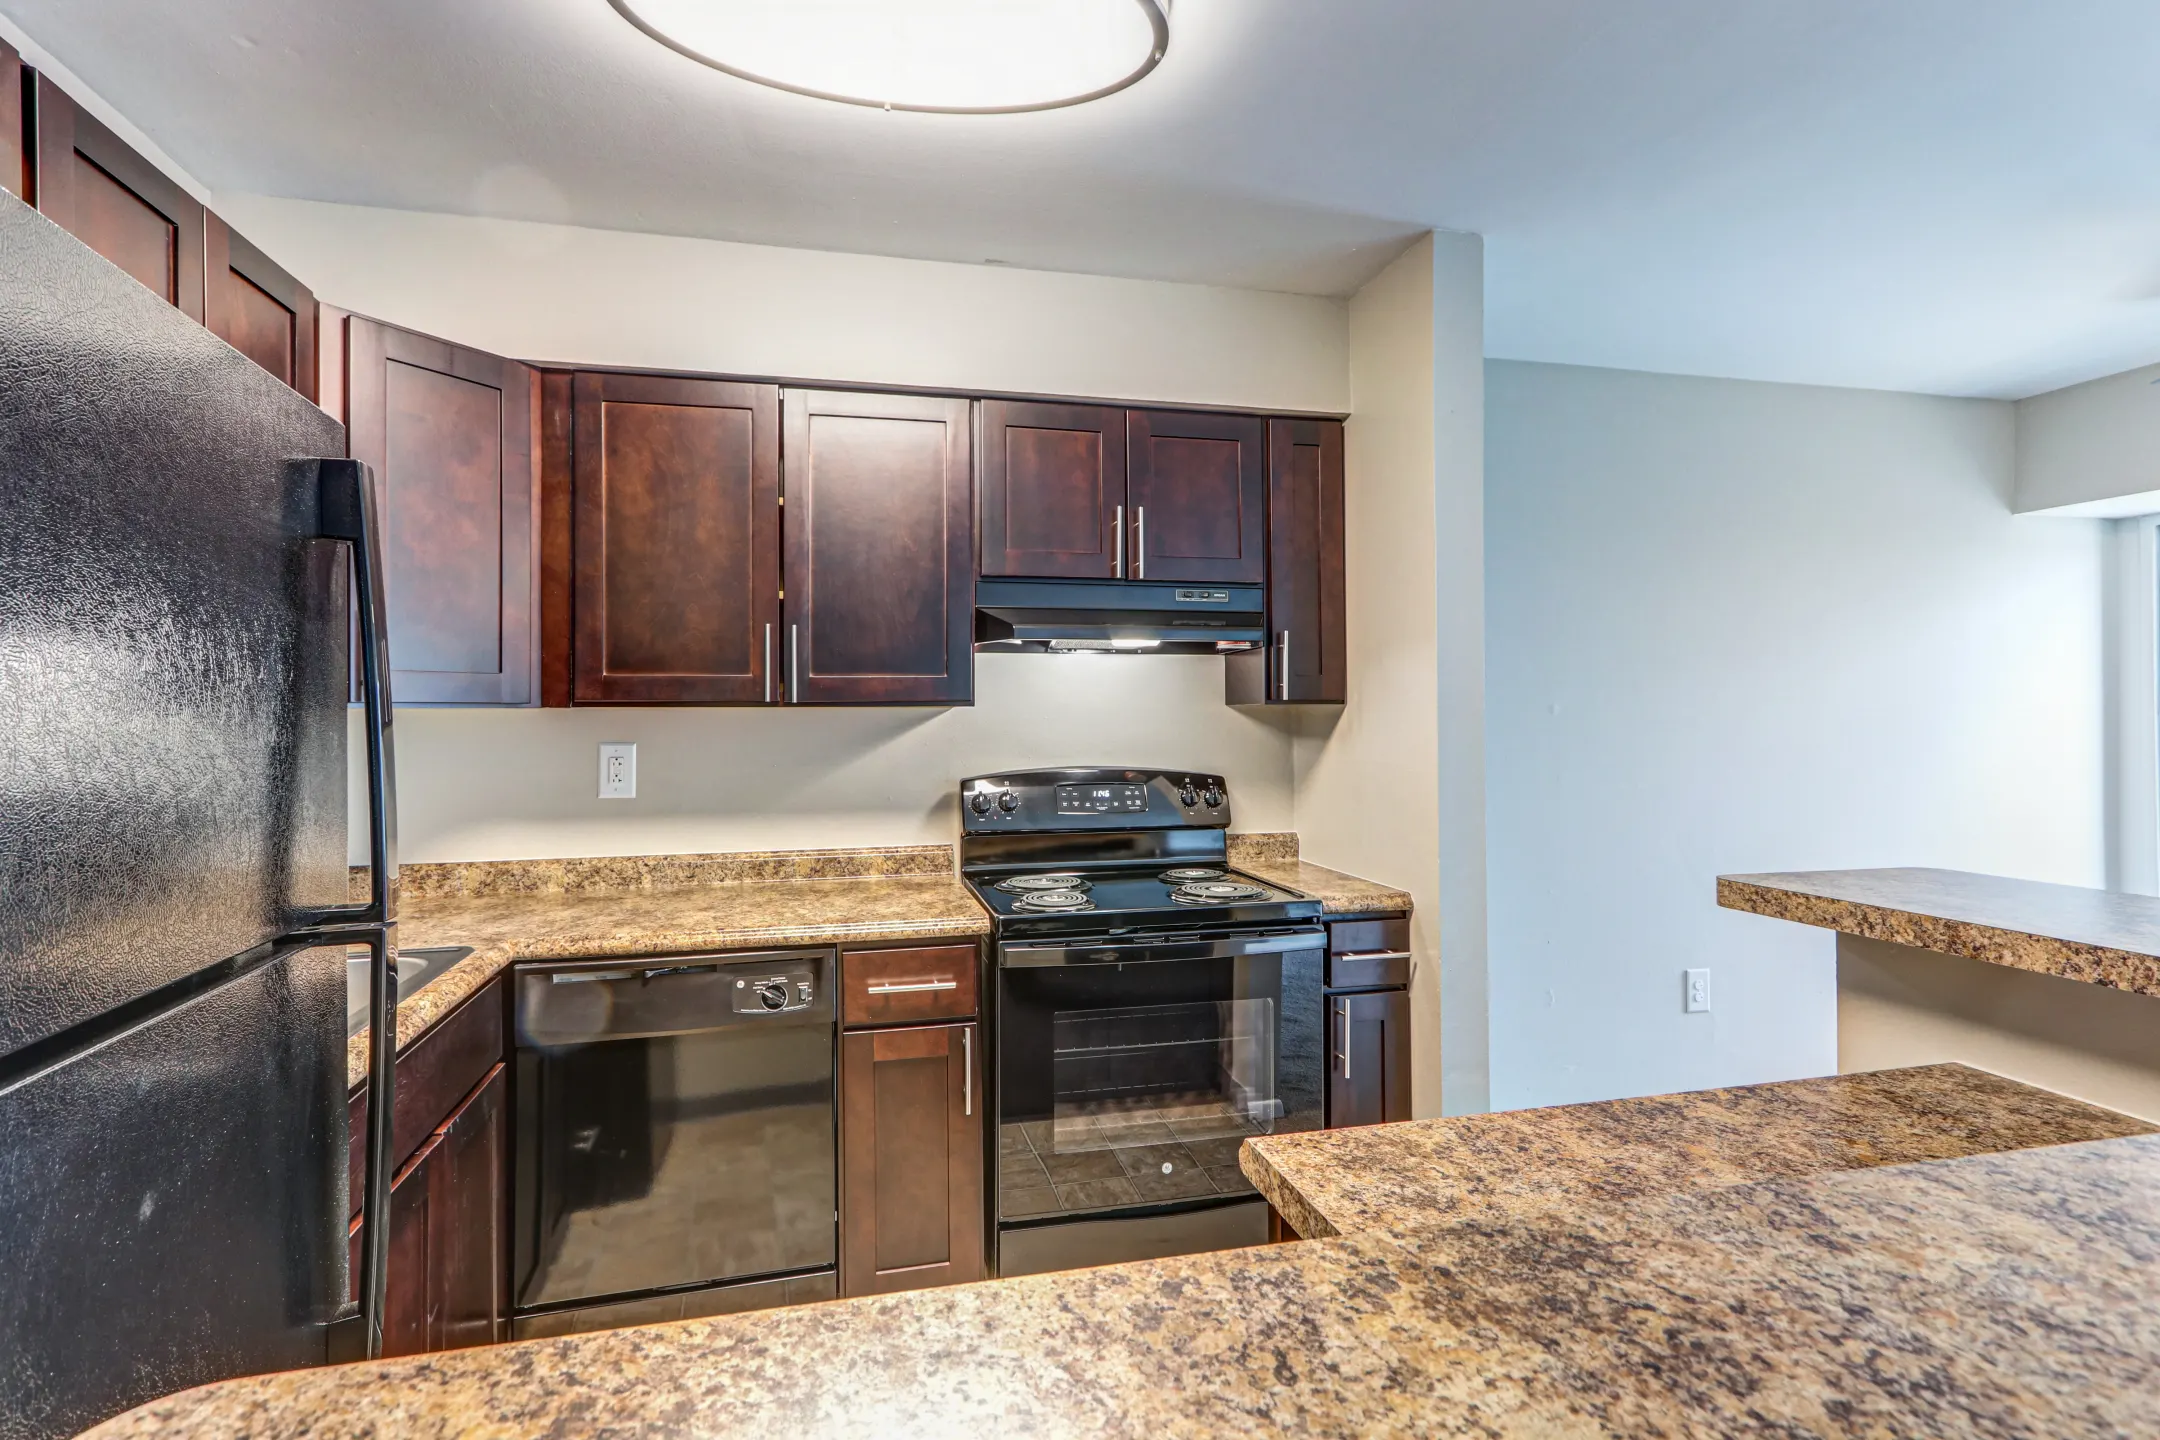 Kitchen - Carriage Park Apartments - Pittsburgh, PA